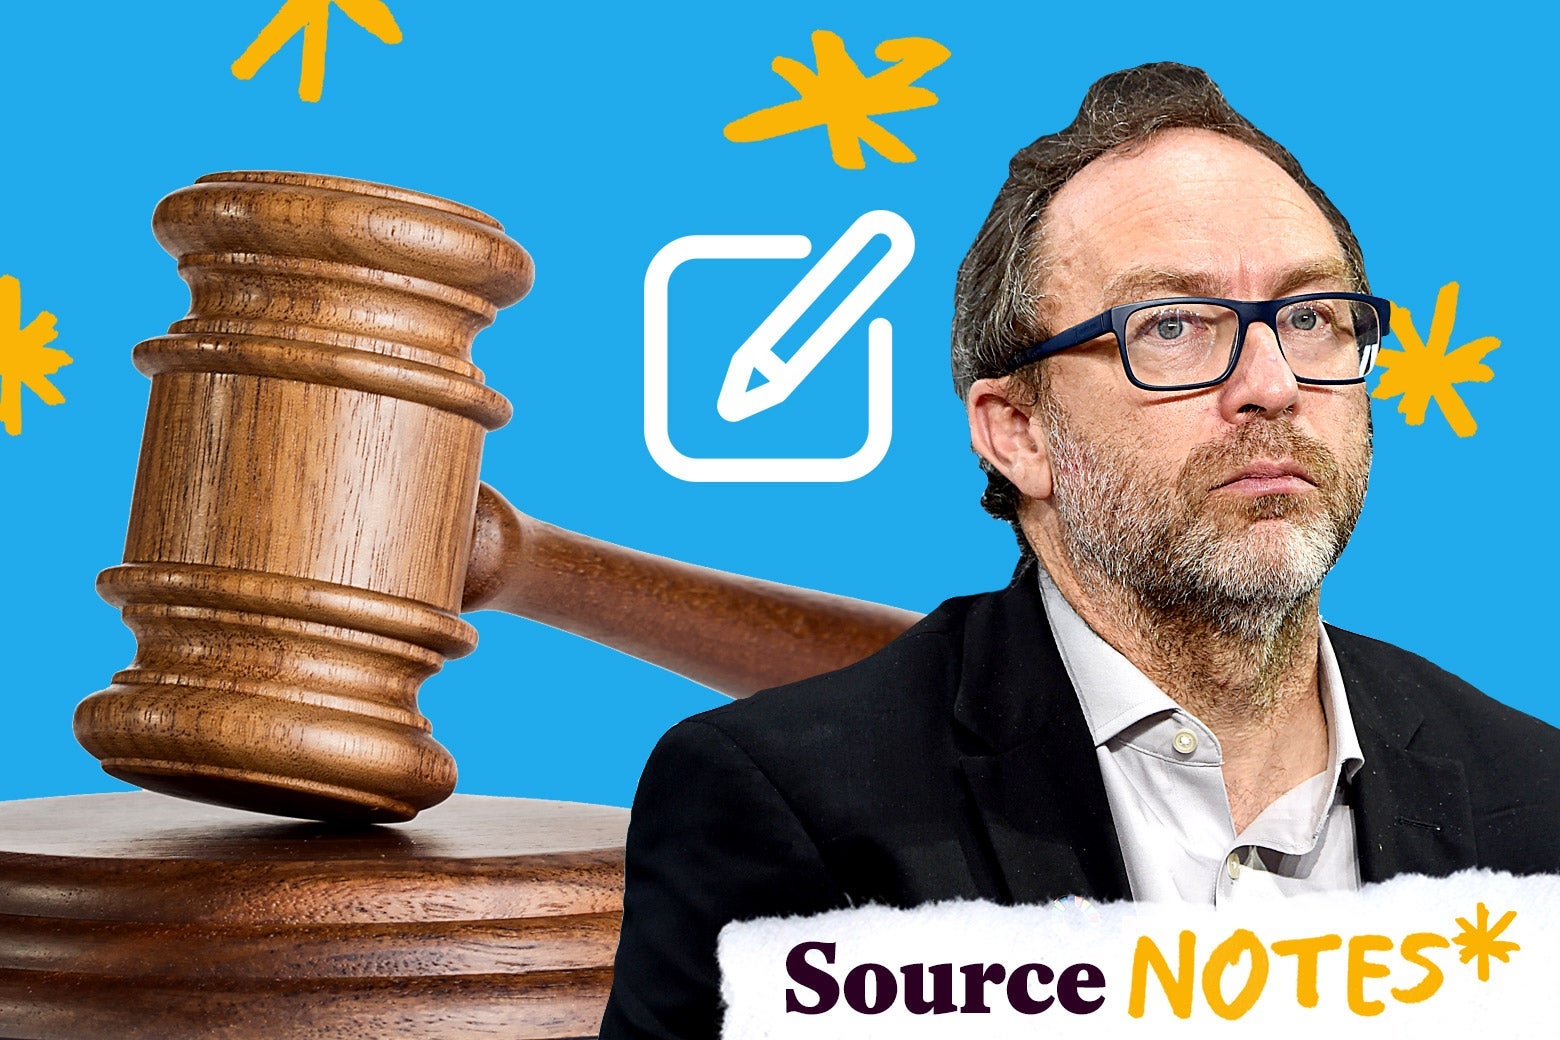 Jimmy Wales with a large gavel behind him and an edit icon